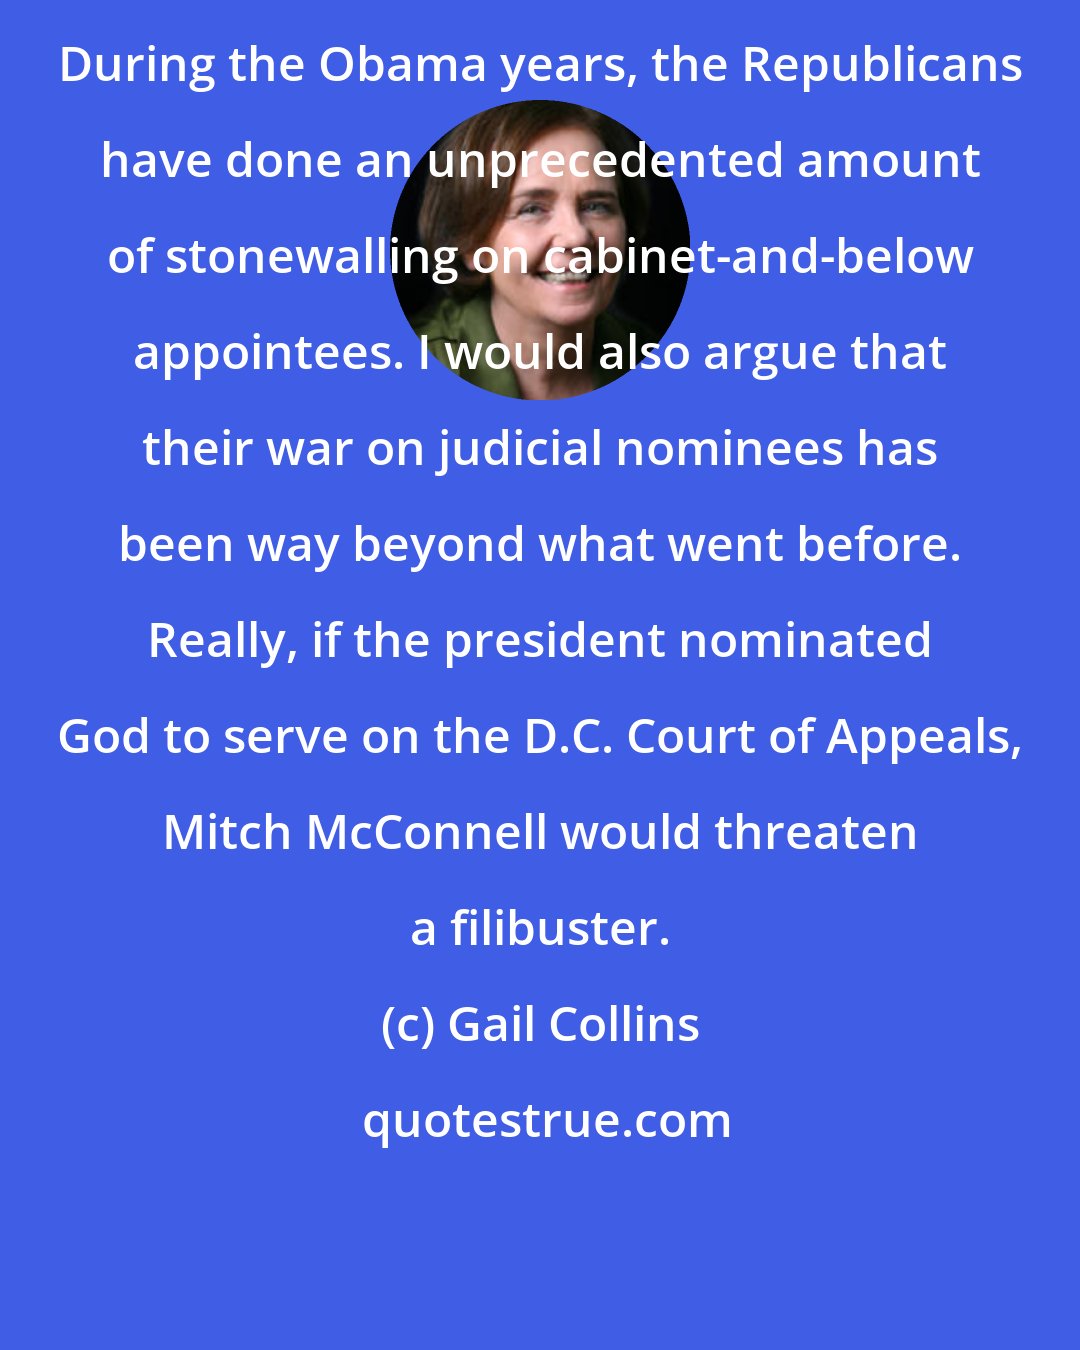 Gail Collins: During the Obama years, the Republicans have done an unprecedented amount of stonewalling on cabinet-and-below appointees. I would also argue that their war on judicial nominees has been way beyond what went before. Really, if the president nominated God to serve on the D.C. Court of Appeals, Mitch McConnell would threaten a filibuster.